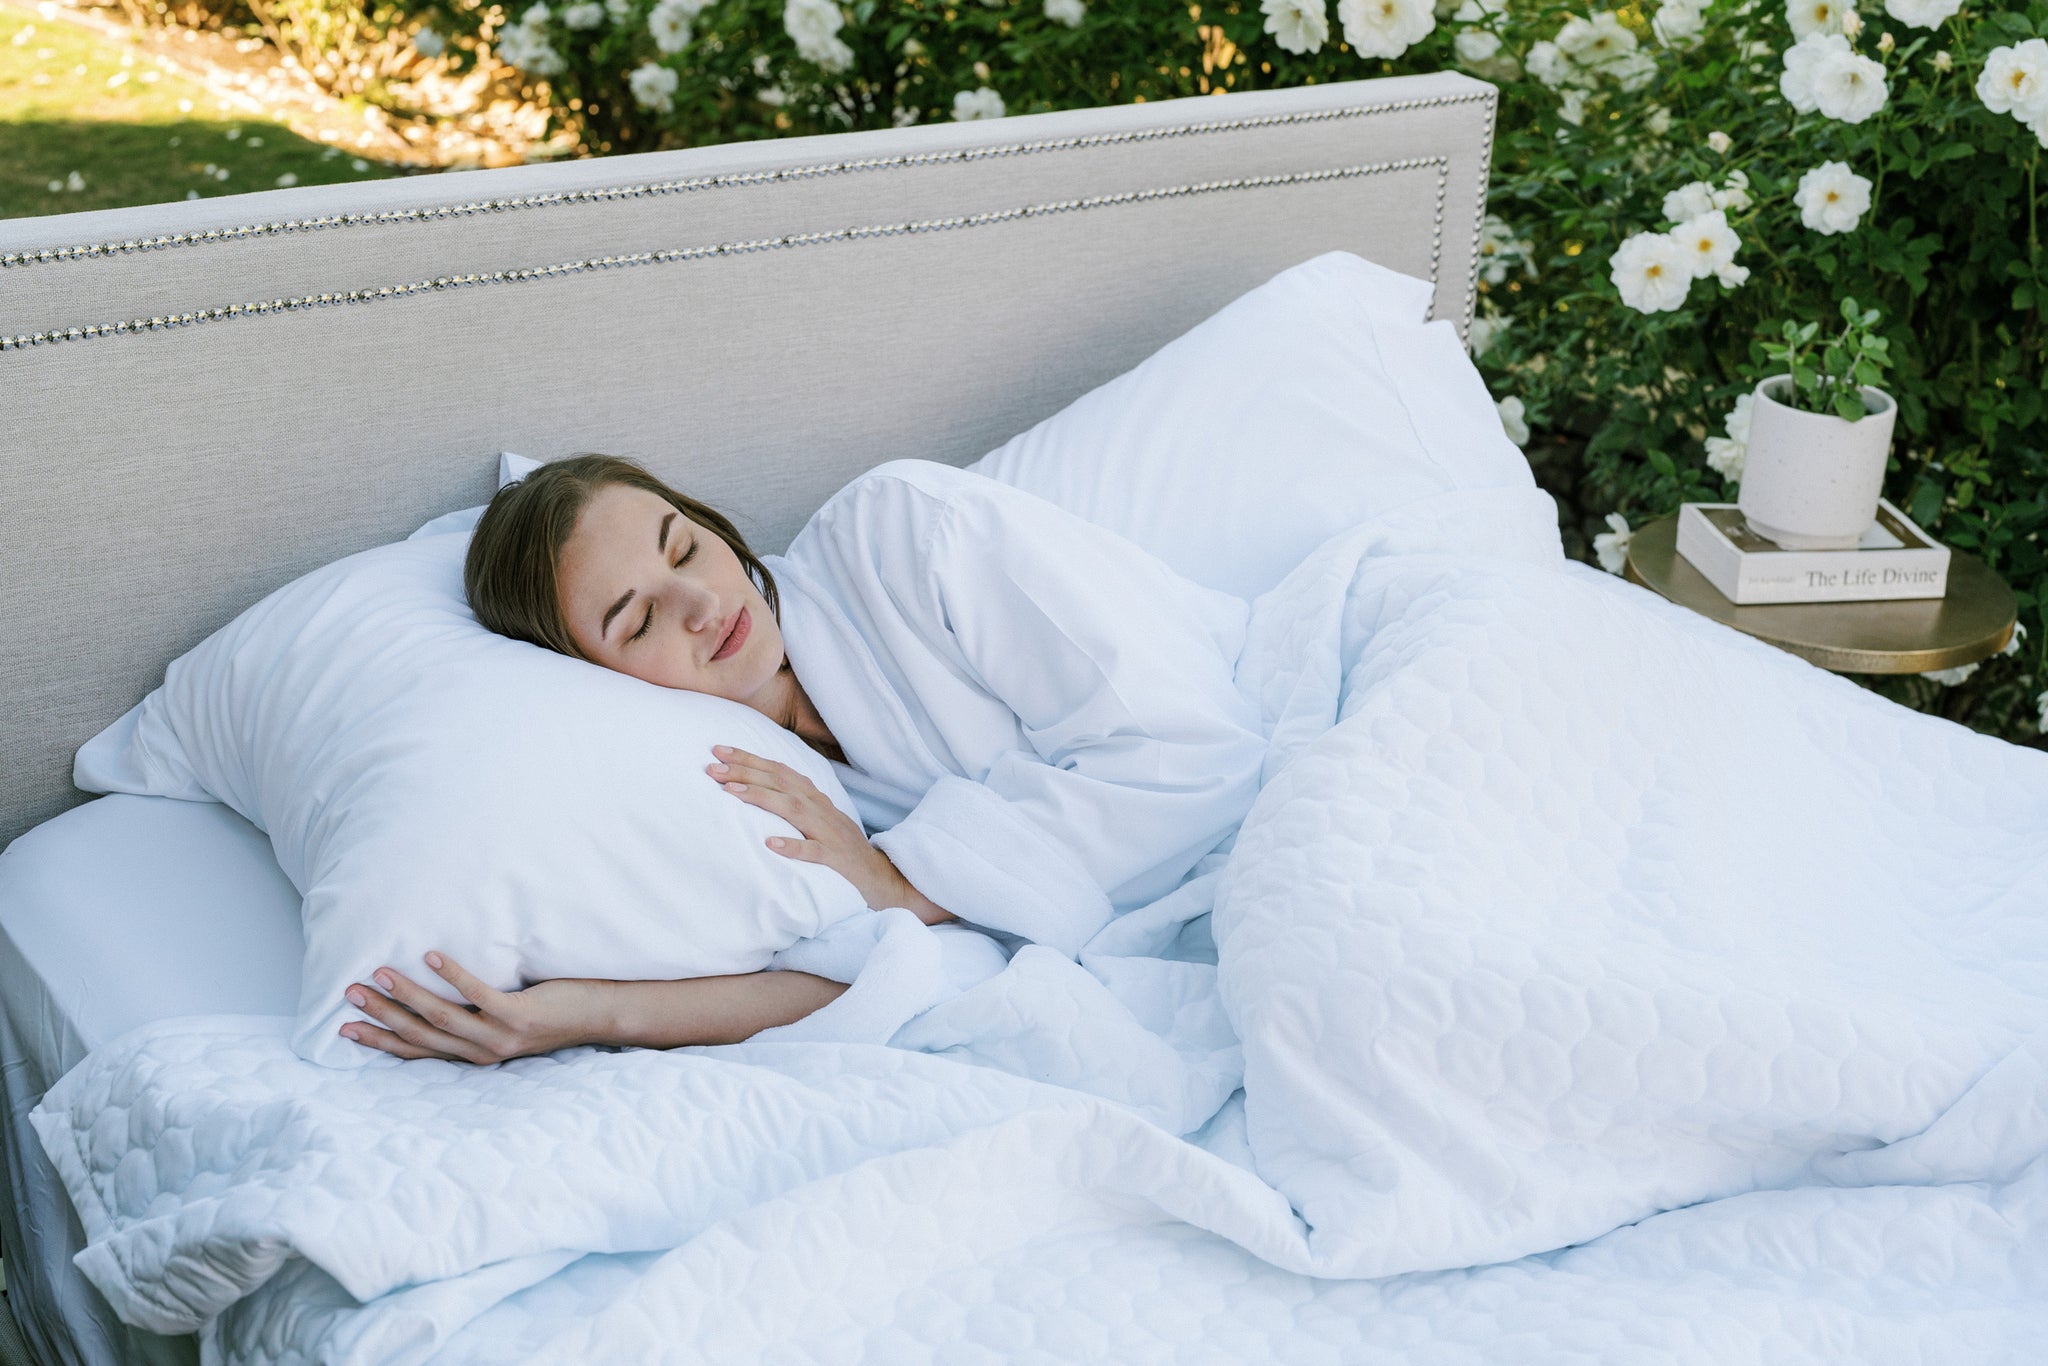 Proper seasonal bedding gives you the support you need to sleep more comfortably